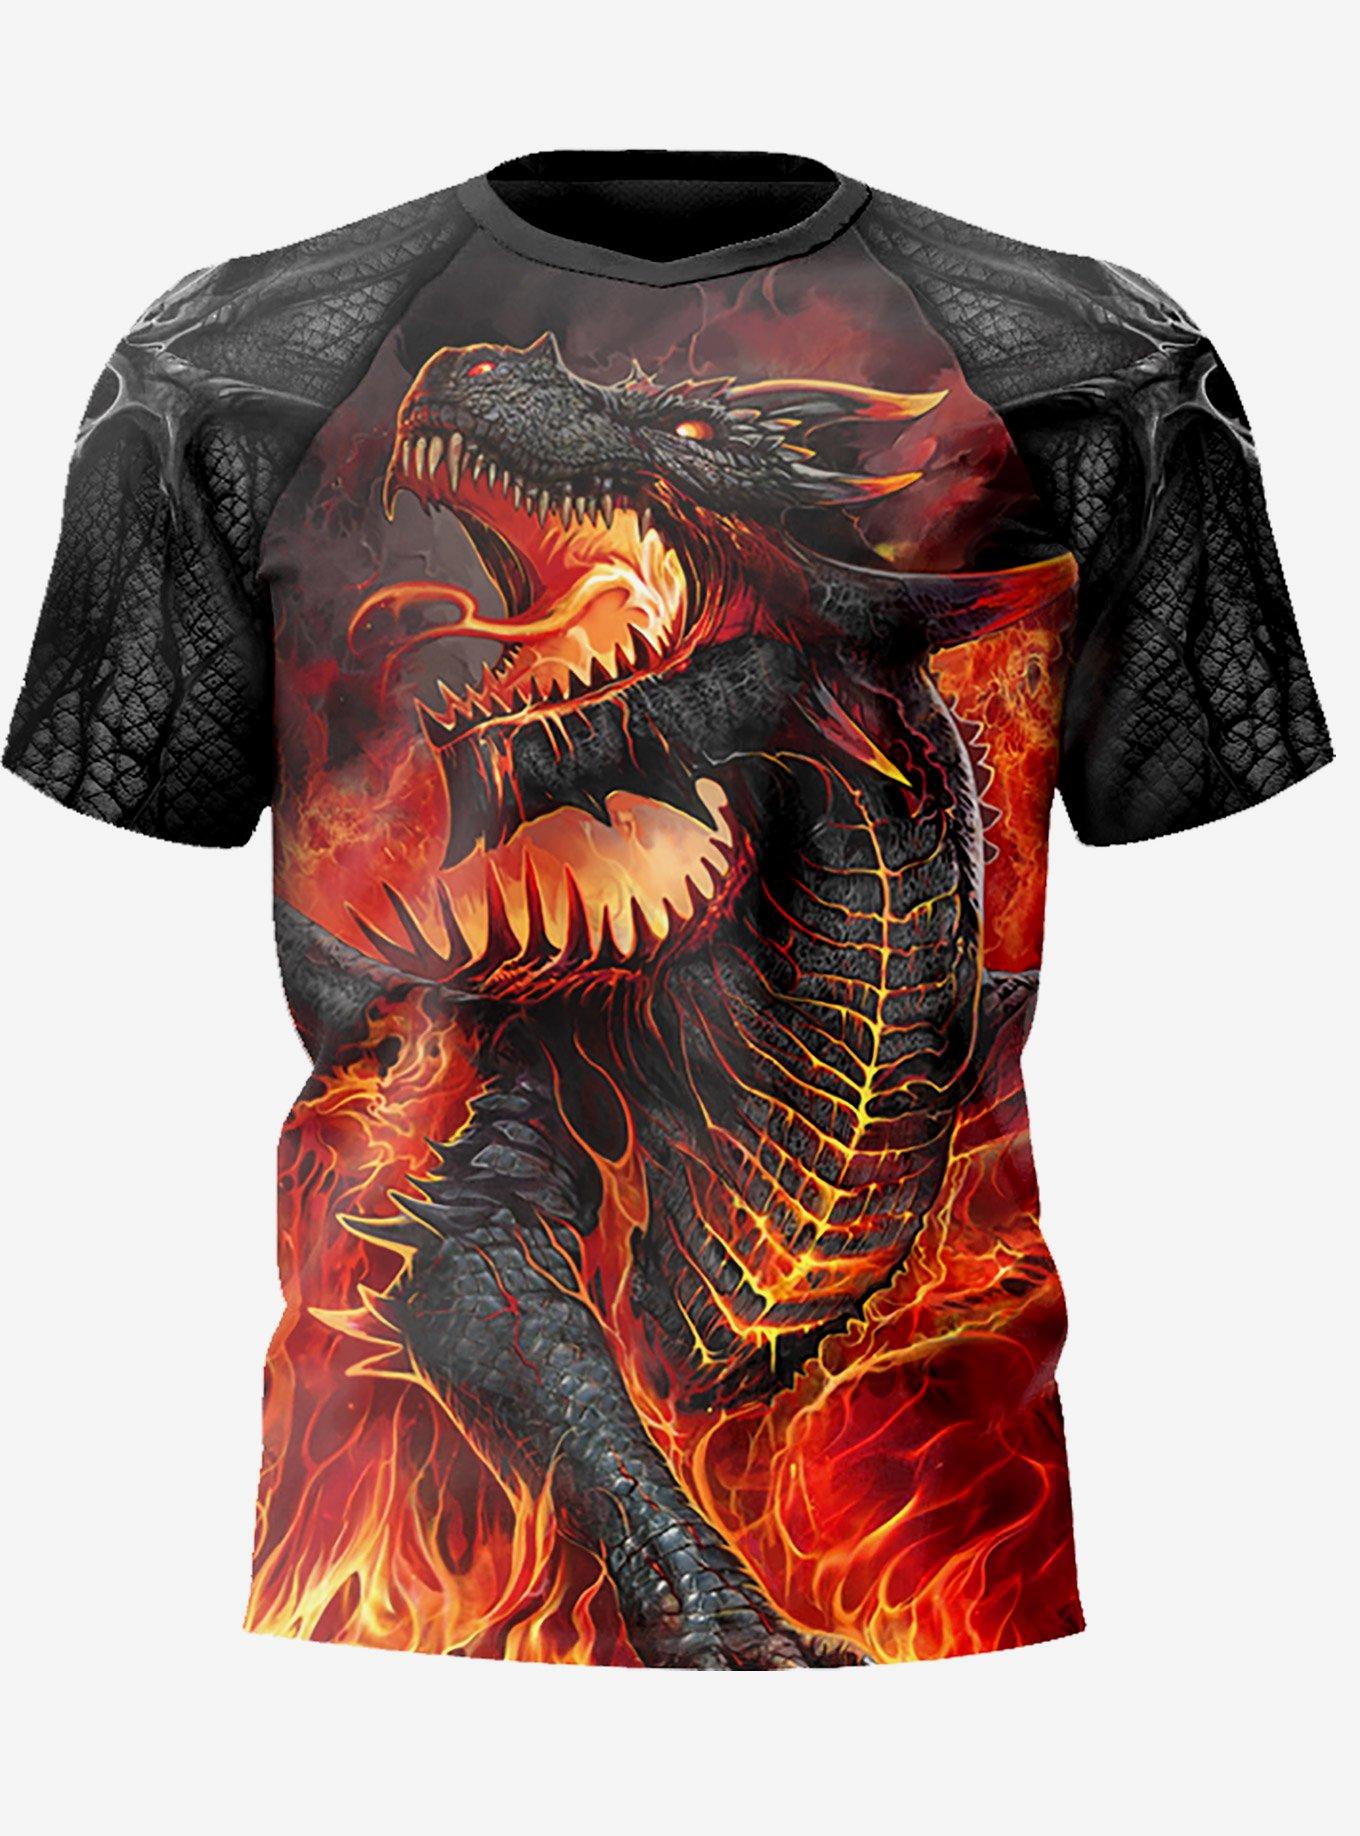 Draconis Sustainable T-Shirt, BLACK, hi-res